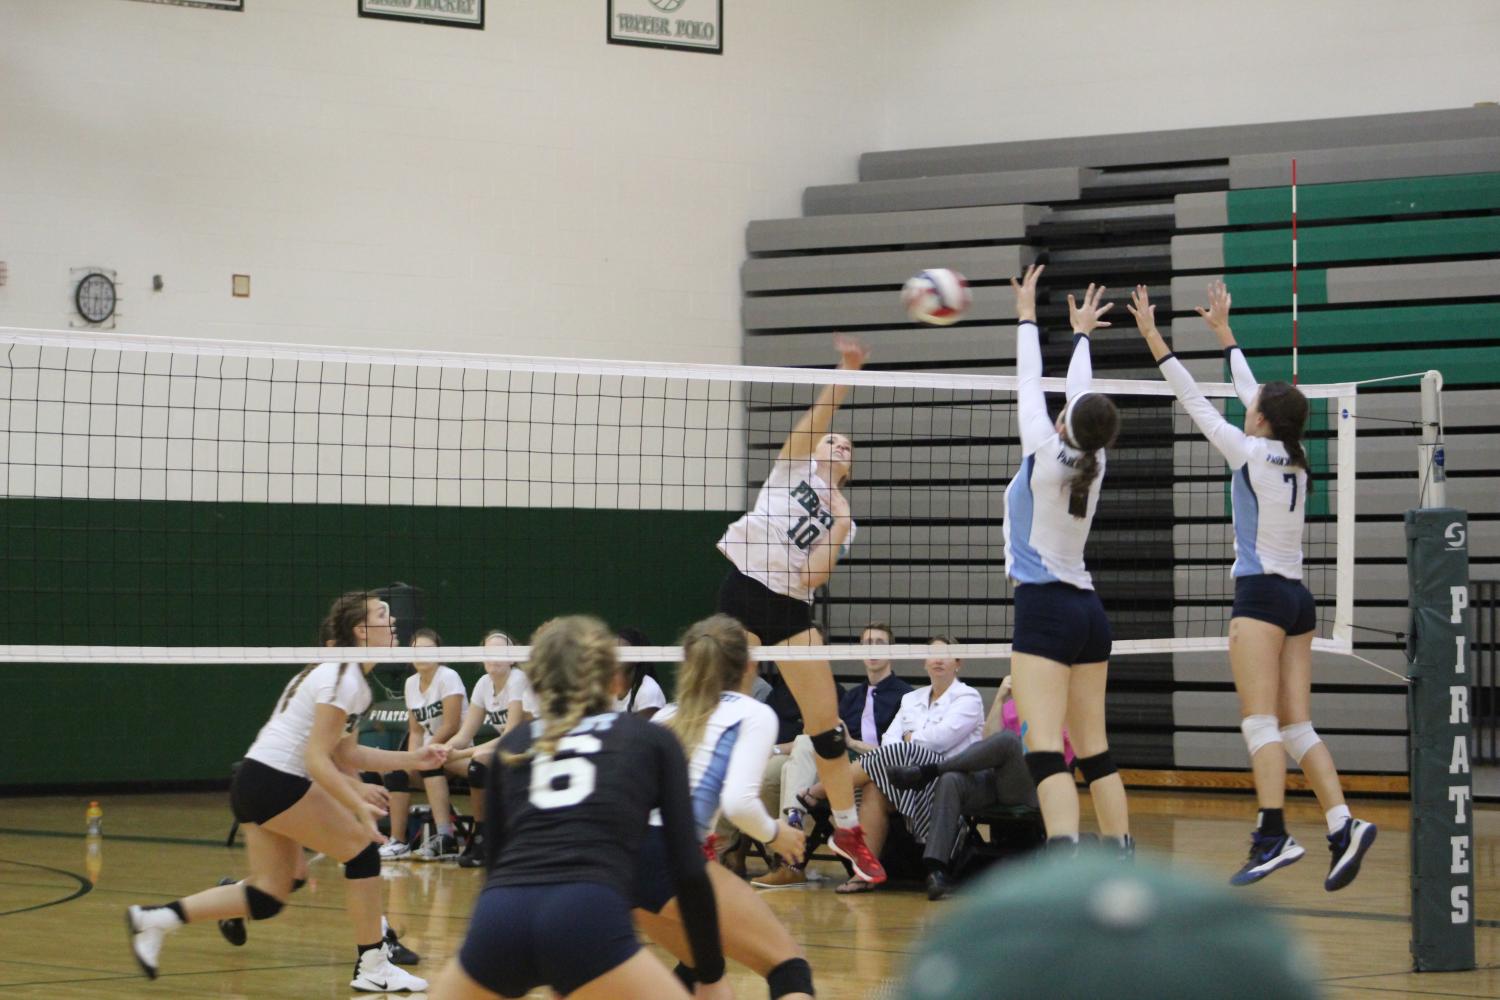 Pattonville girls volleyball takes on tough tournament